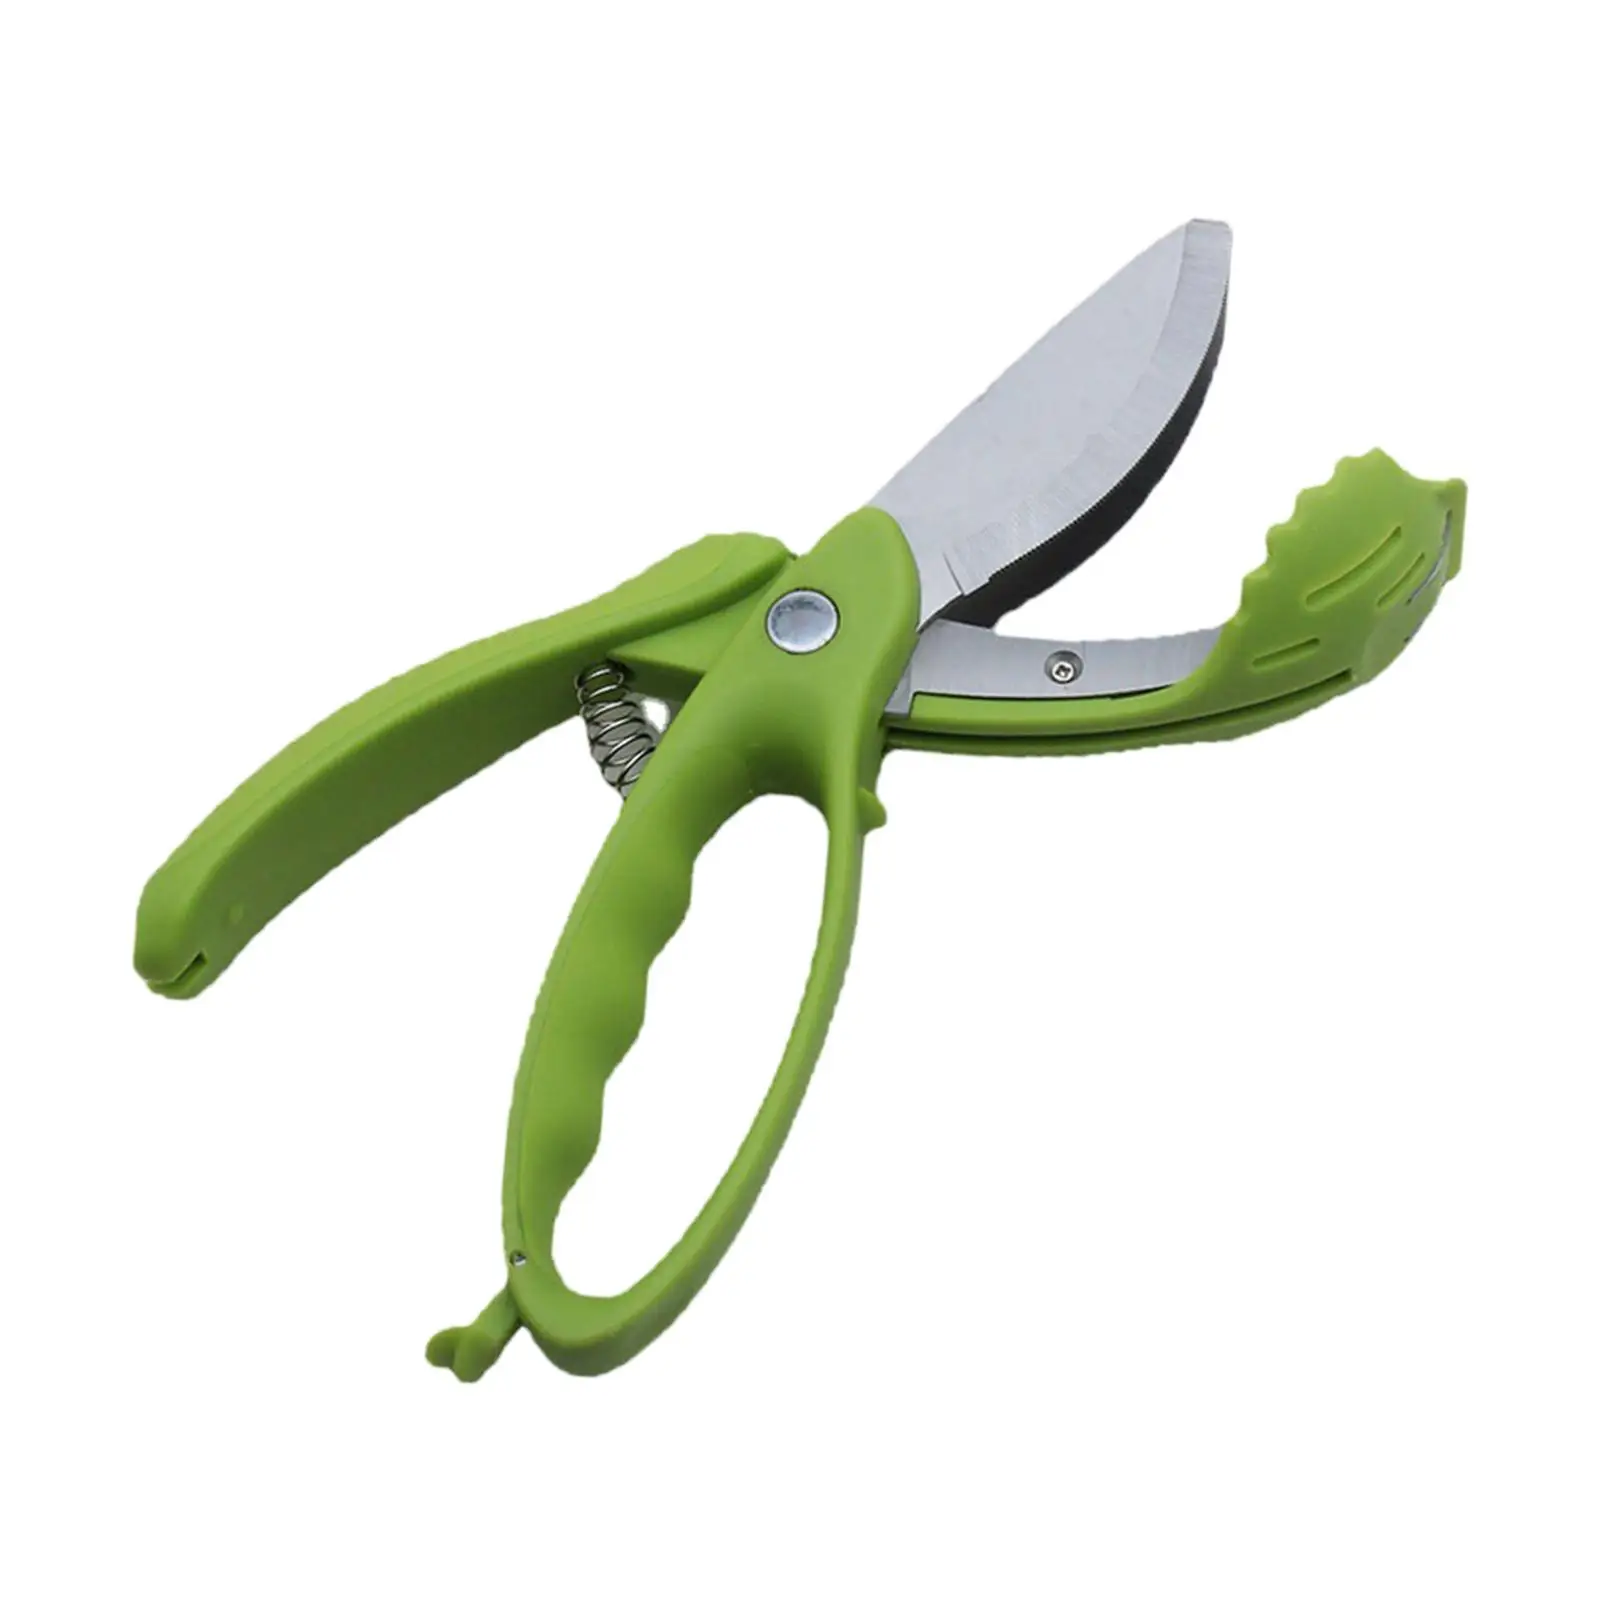 Salad Scissors Portable Stainless Steel Double Blade Kitchen Tool Salad Cutter Chopper Scissors for Lettuce Vegetable Cucumbers